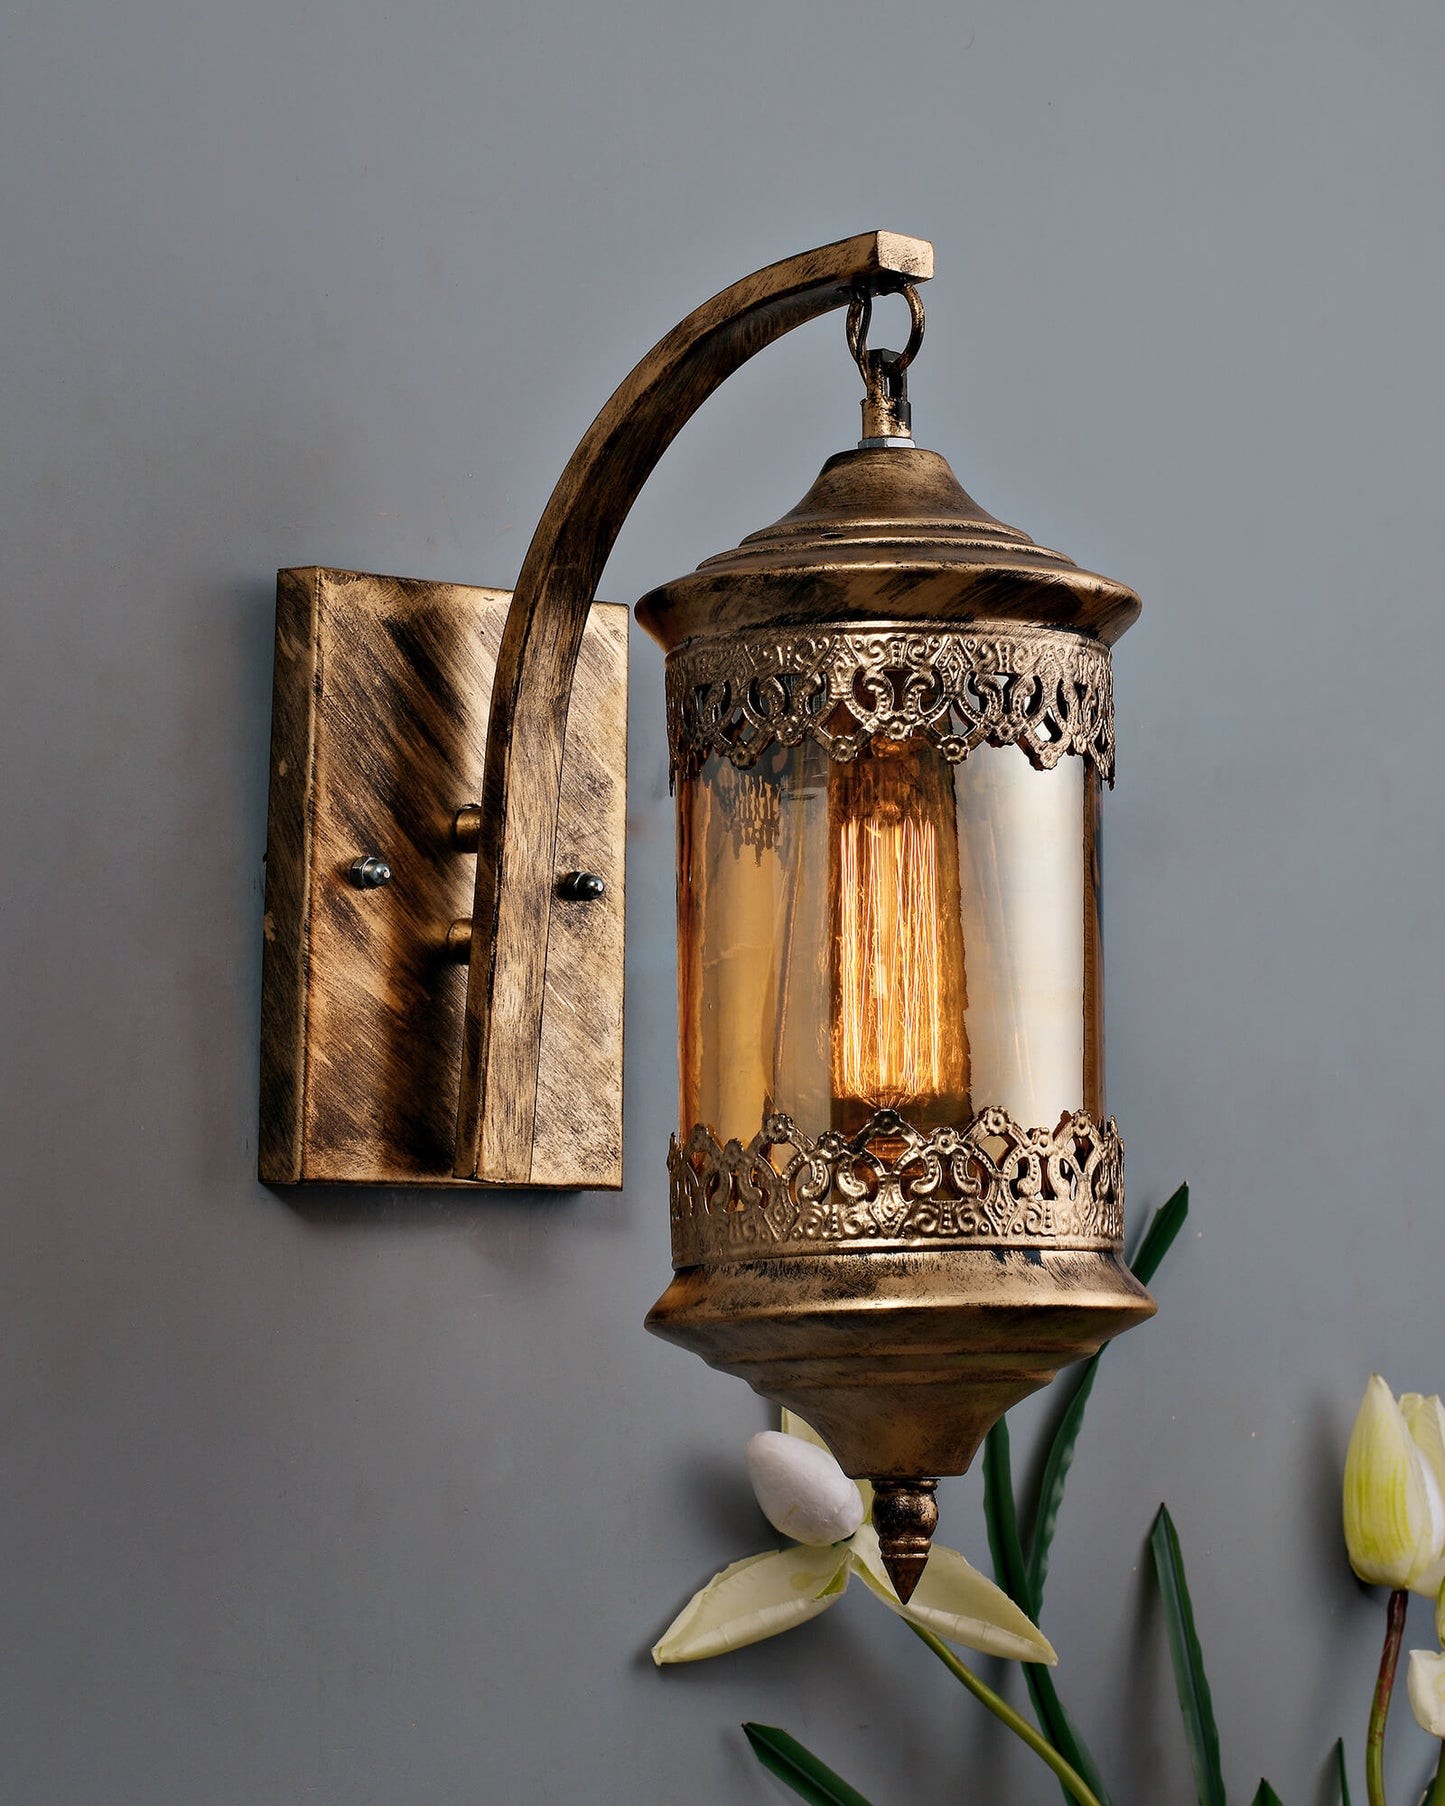 Carving Cylinder Rustic Wall Sconce Light Fixtures Oil Rubbed Bronze Finish